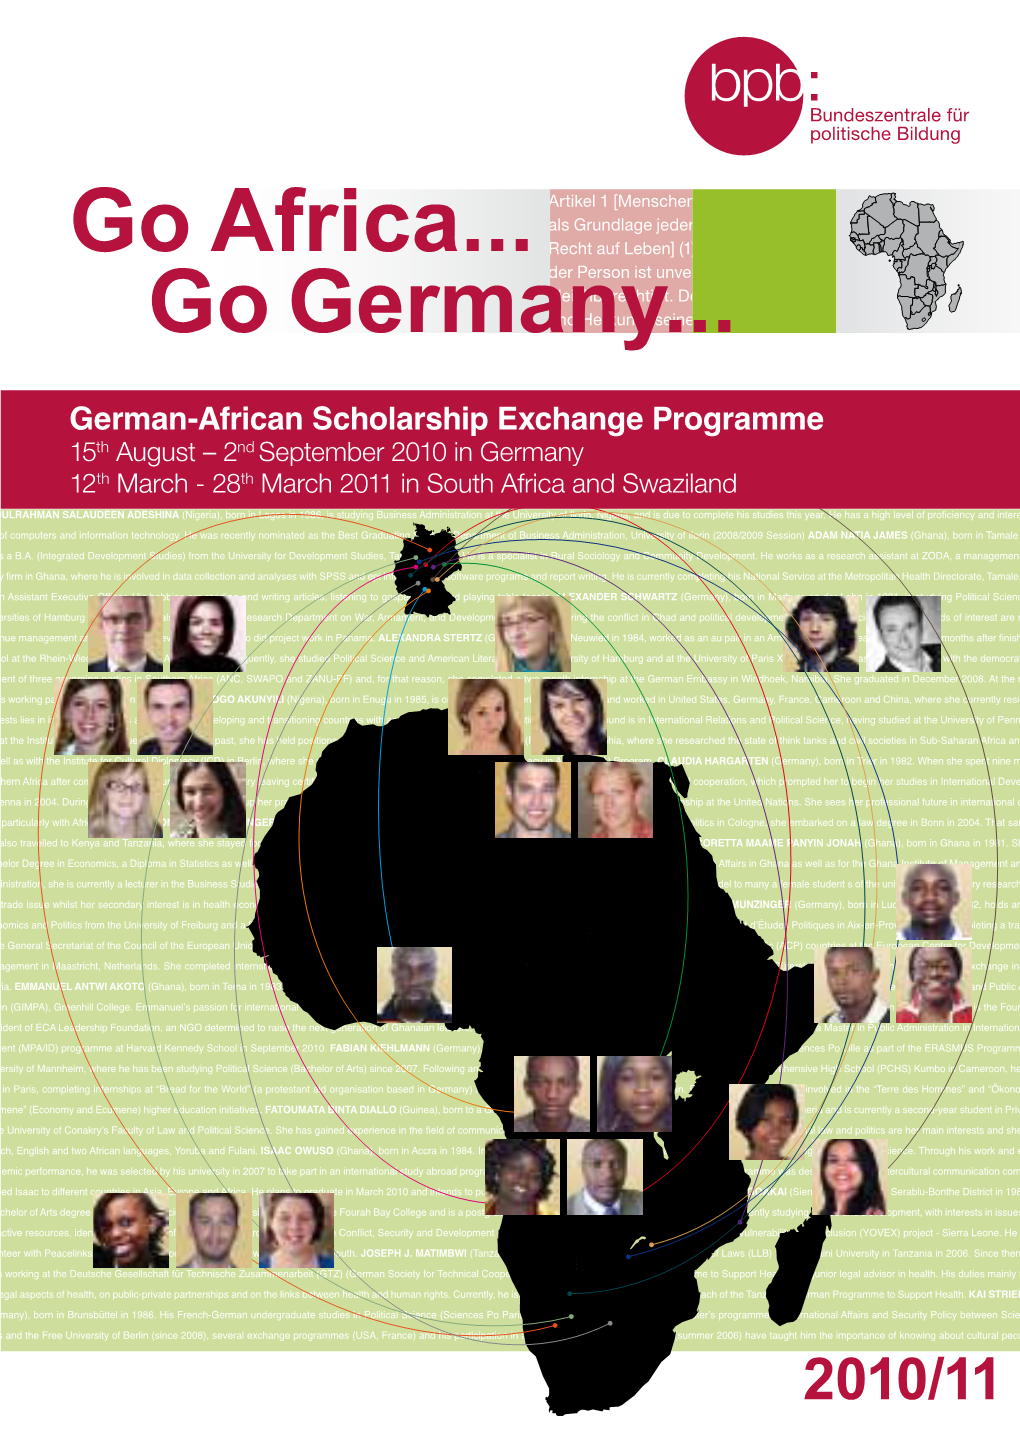 Go Africa... Go Germany...” Exchange Programme Already Entering Its Fourth Run